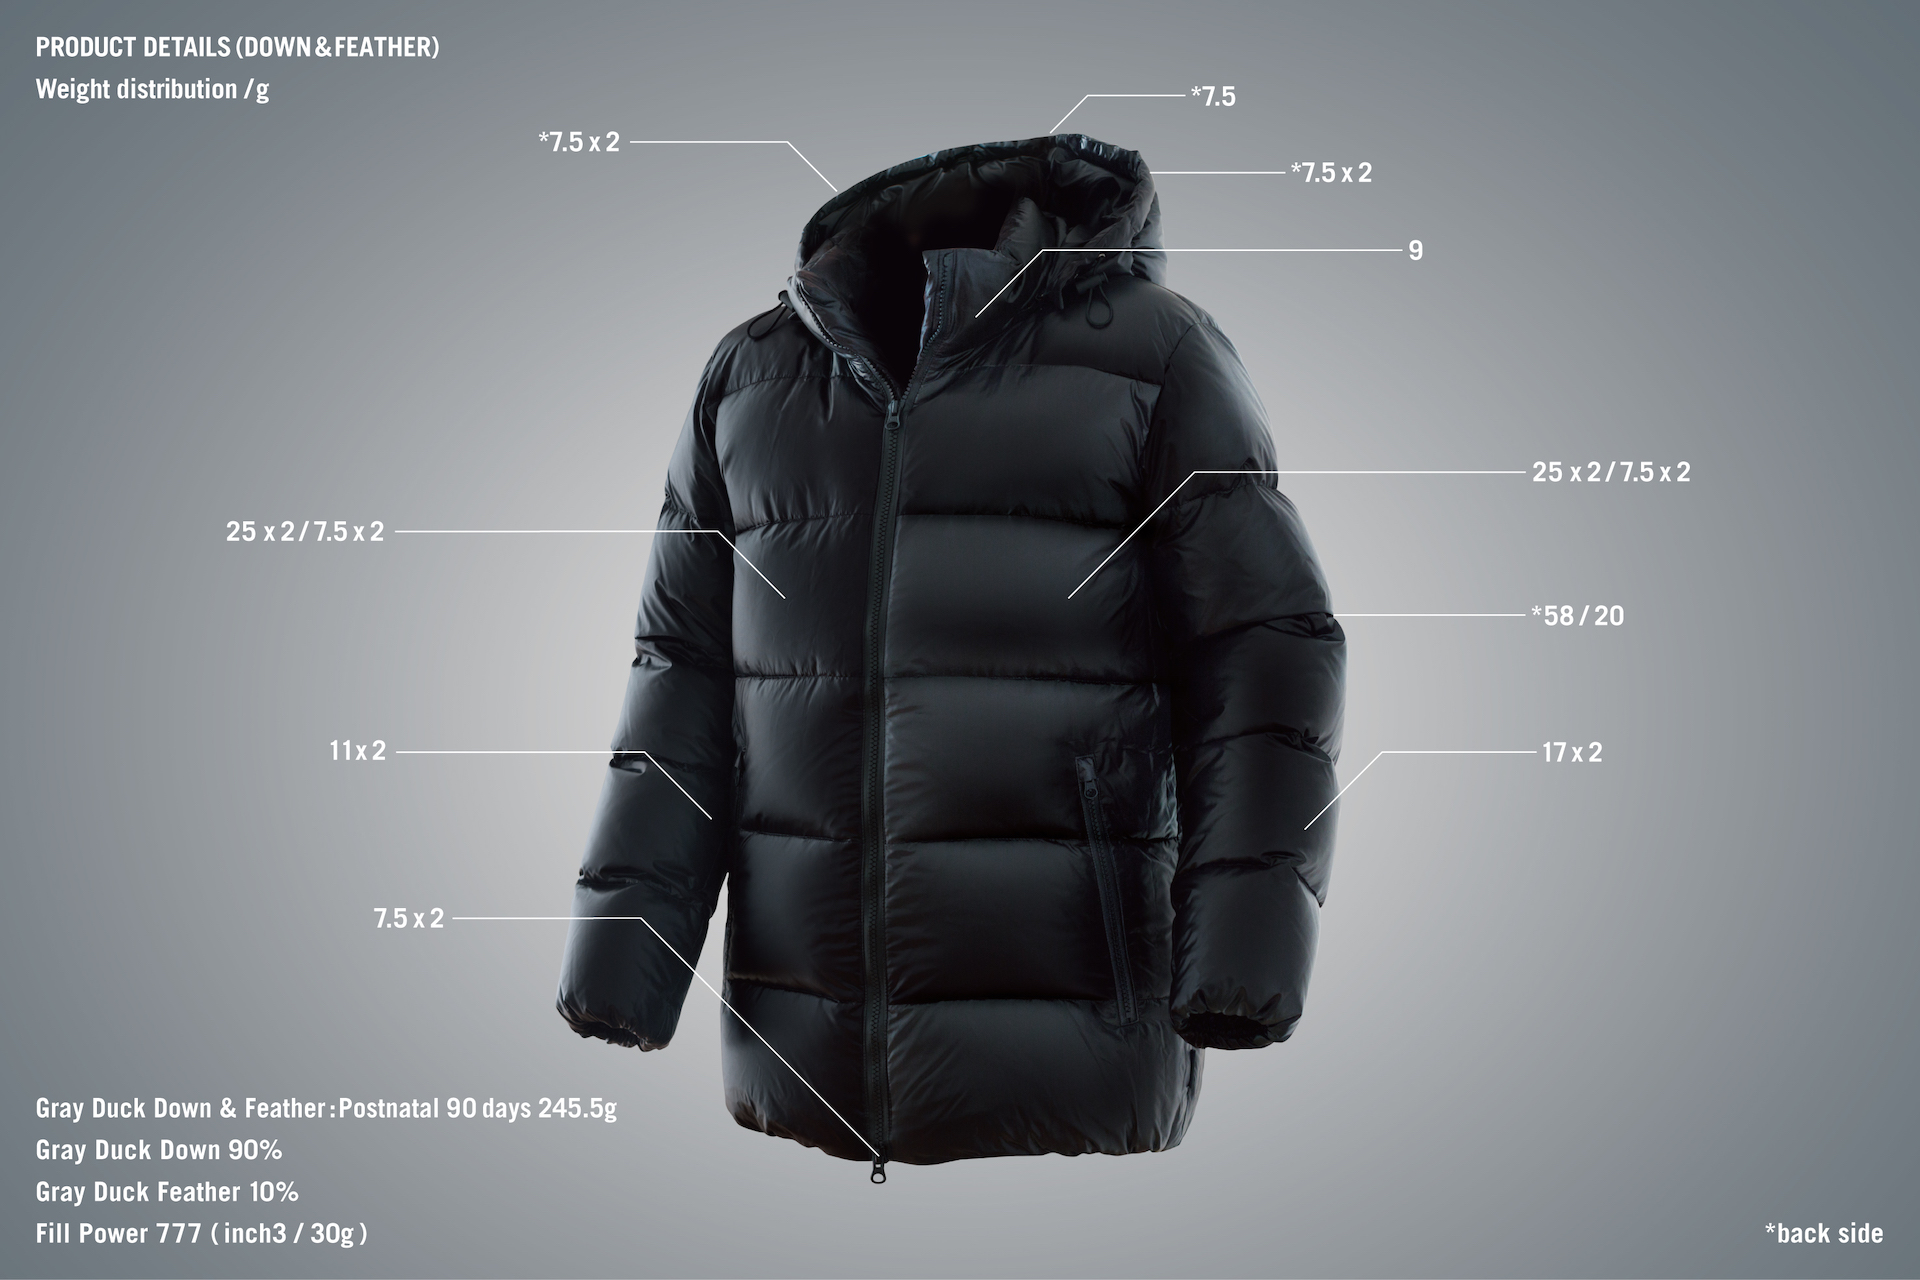 THE MONSTER SPEC®️ “DOWN JACKET”